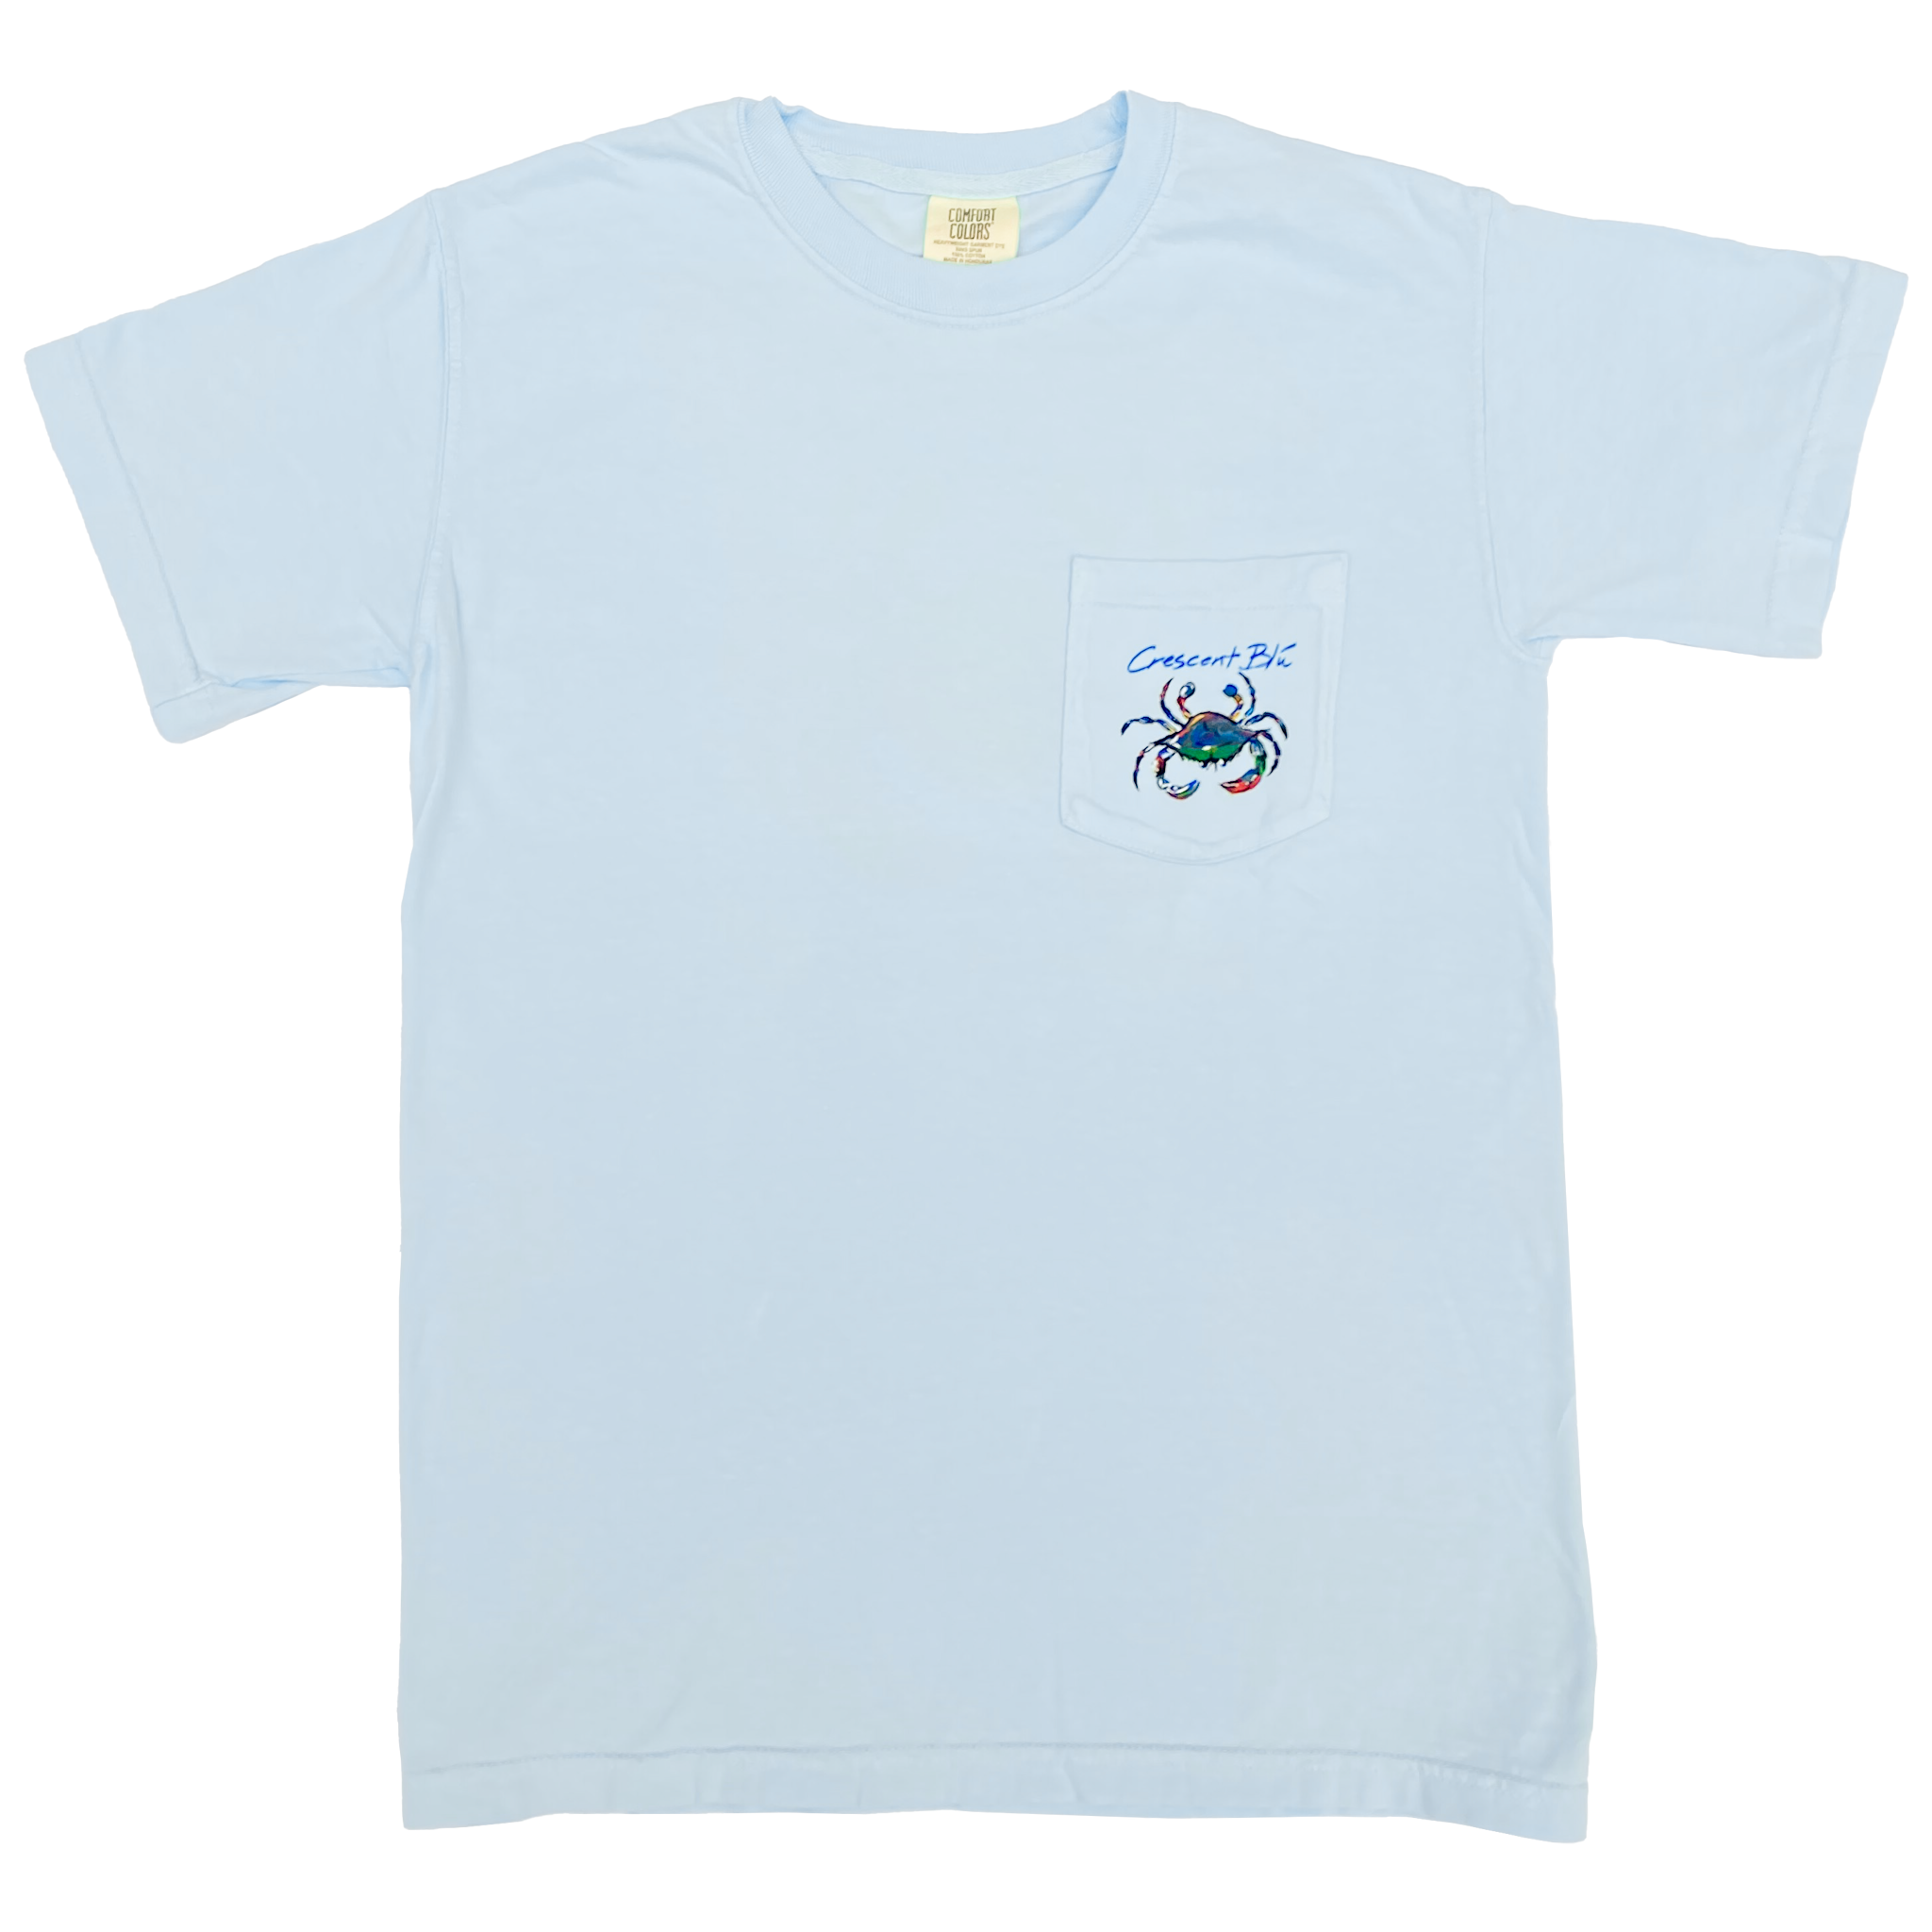 Front of Adult Short sleeve Tee, chambray in color, with small Crescent Blu signature crab on left chest pocket 